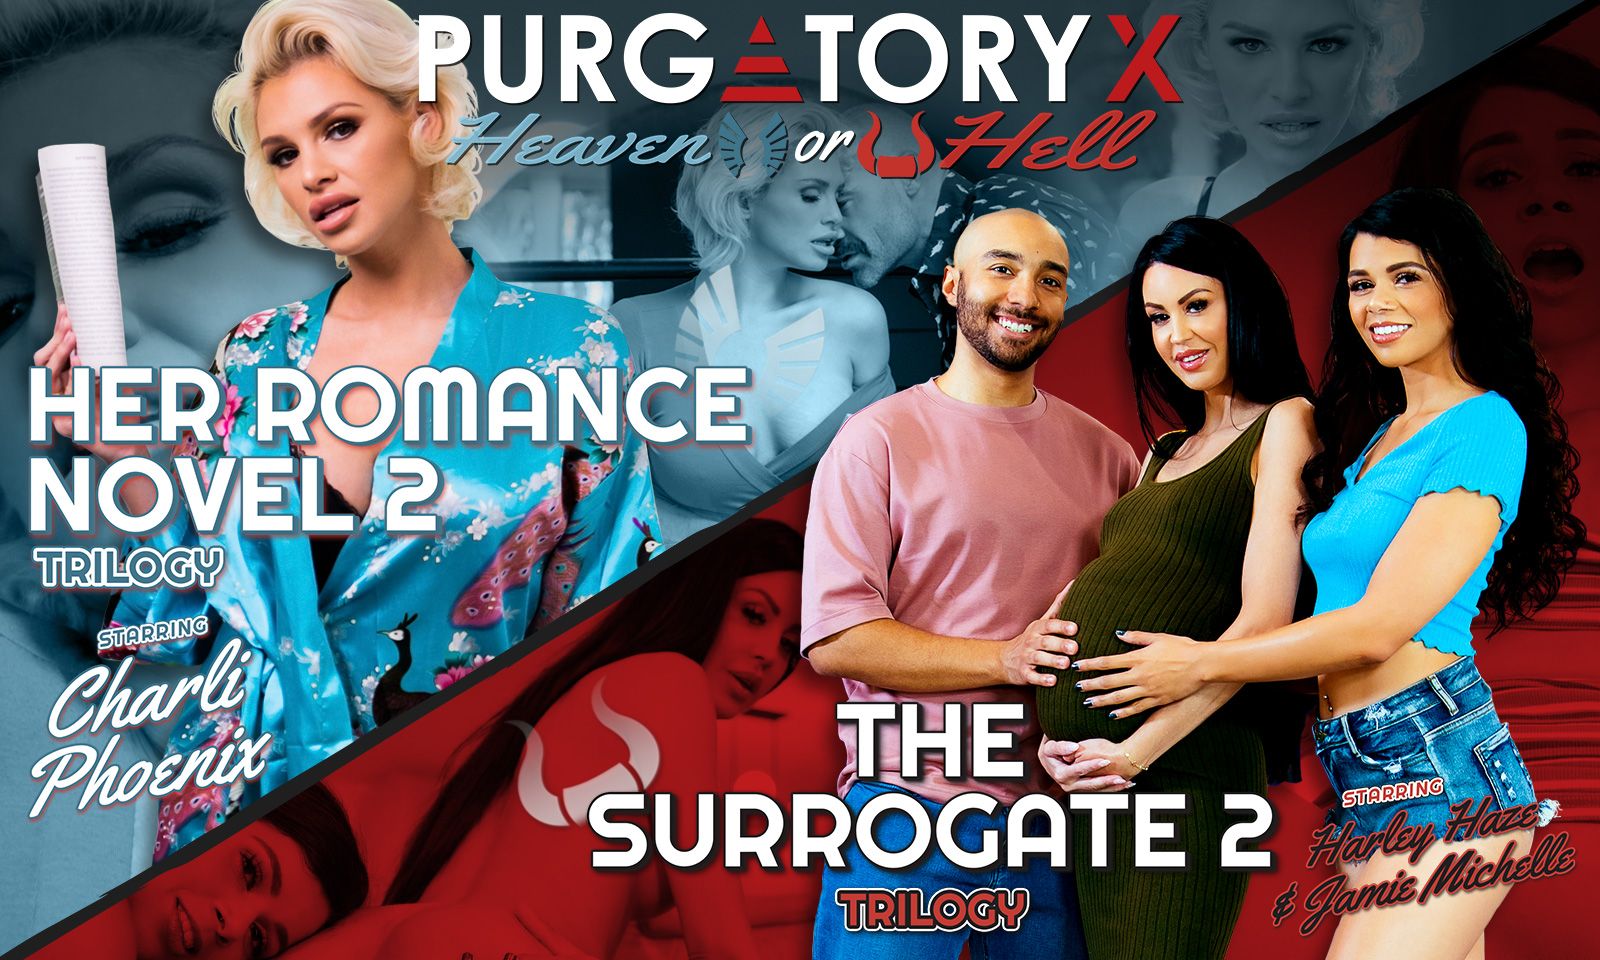 Purgatory X Debuts New 2-in-1 DVD